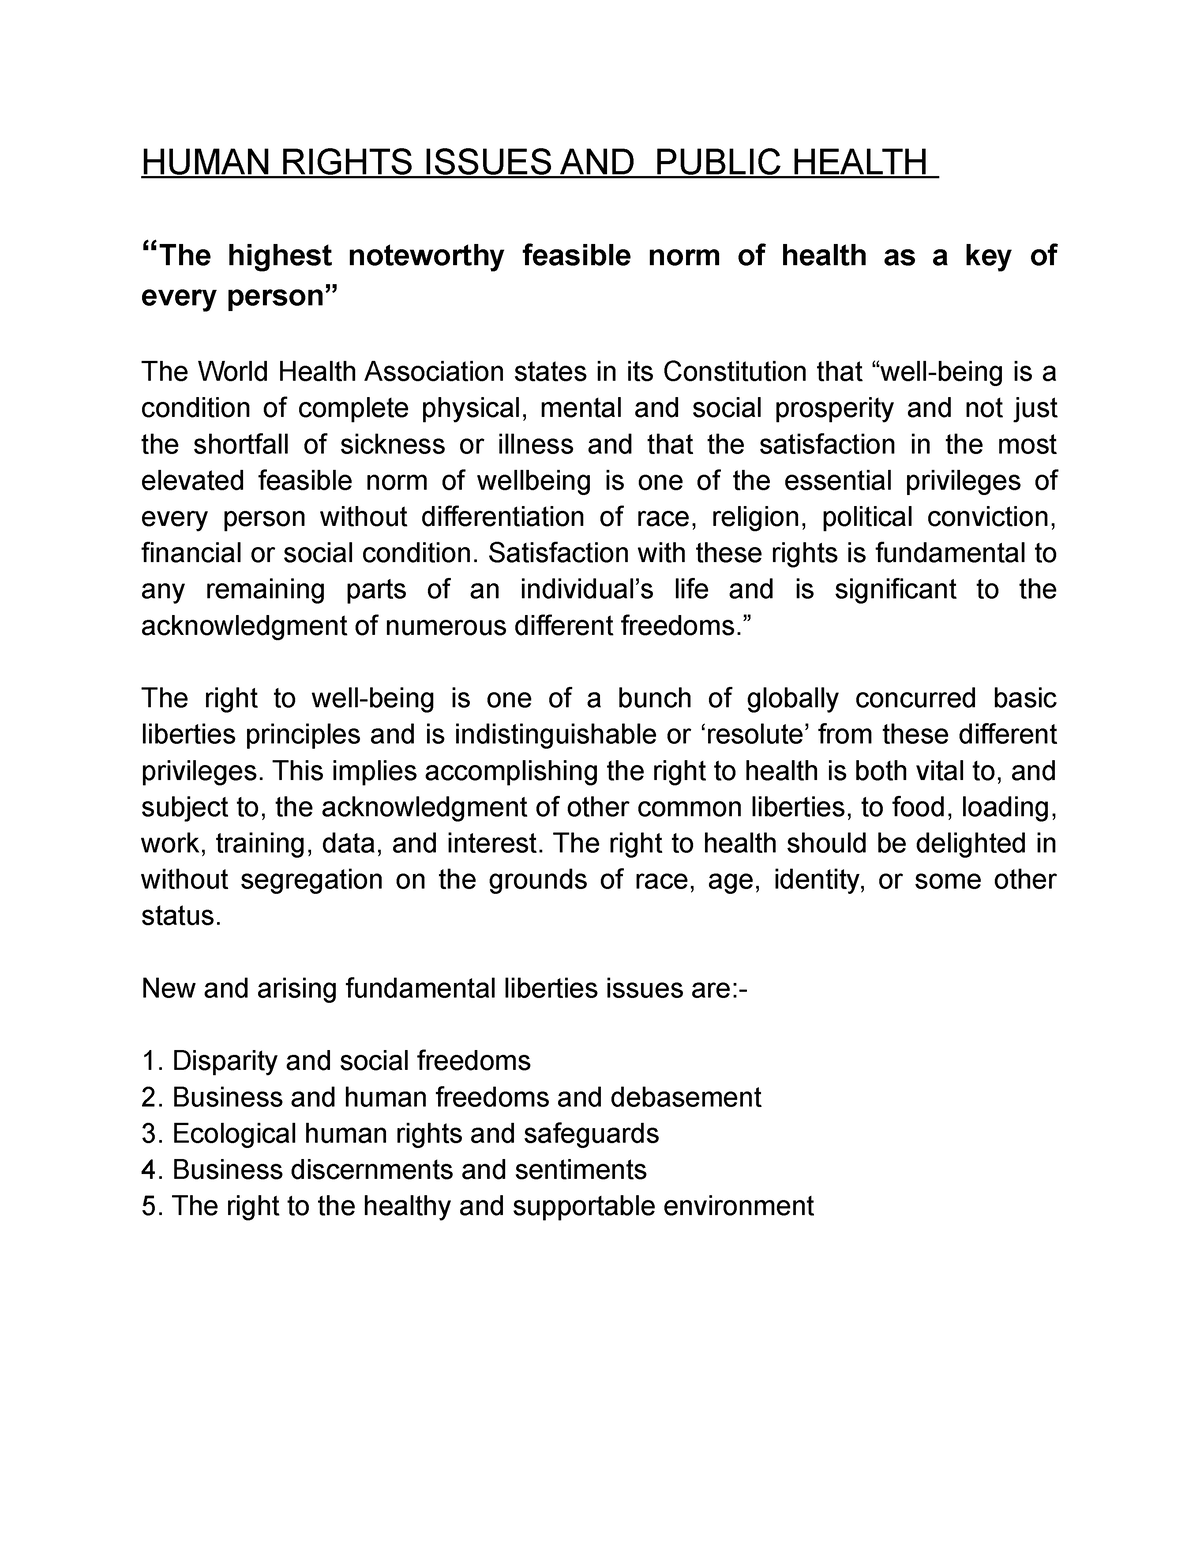 human rights issues and public health essay